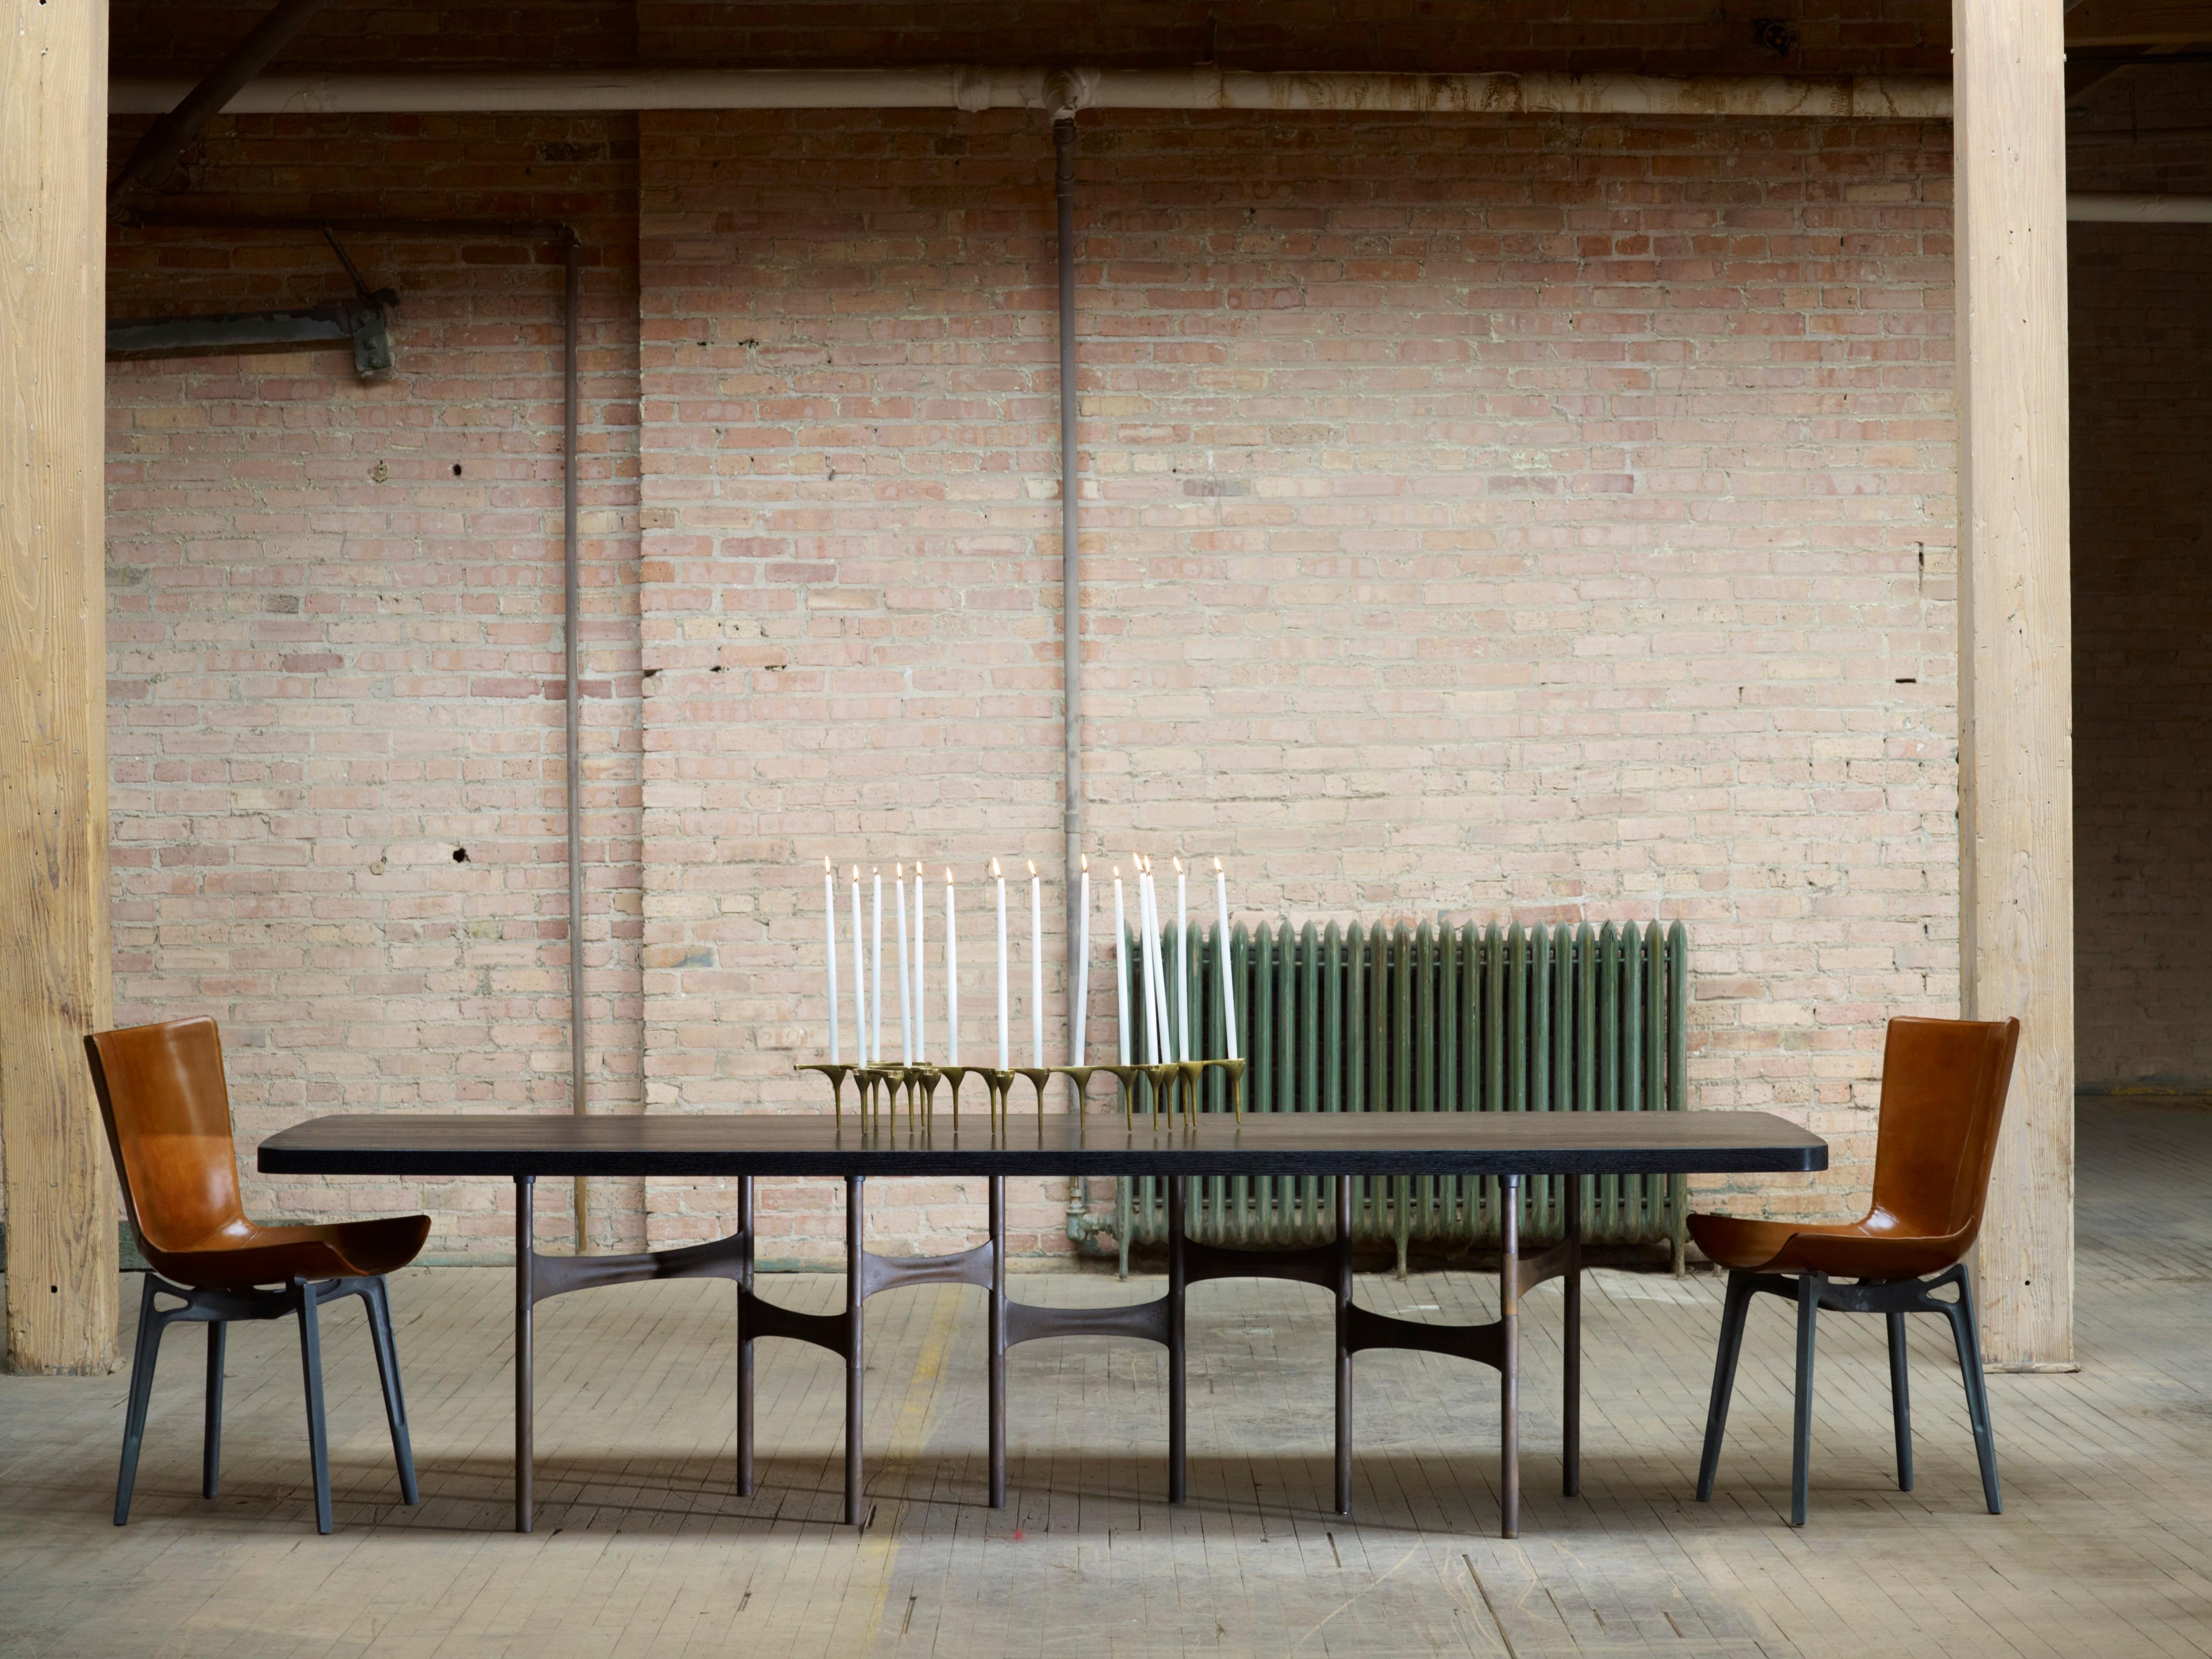 The link dining table is a modular system comprising patinaed cast aluminum and steel components and can be adapted for use with any size table. Table tops are made to order at our studio in Chicago and are available in an extensive range of species